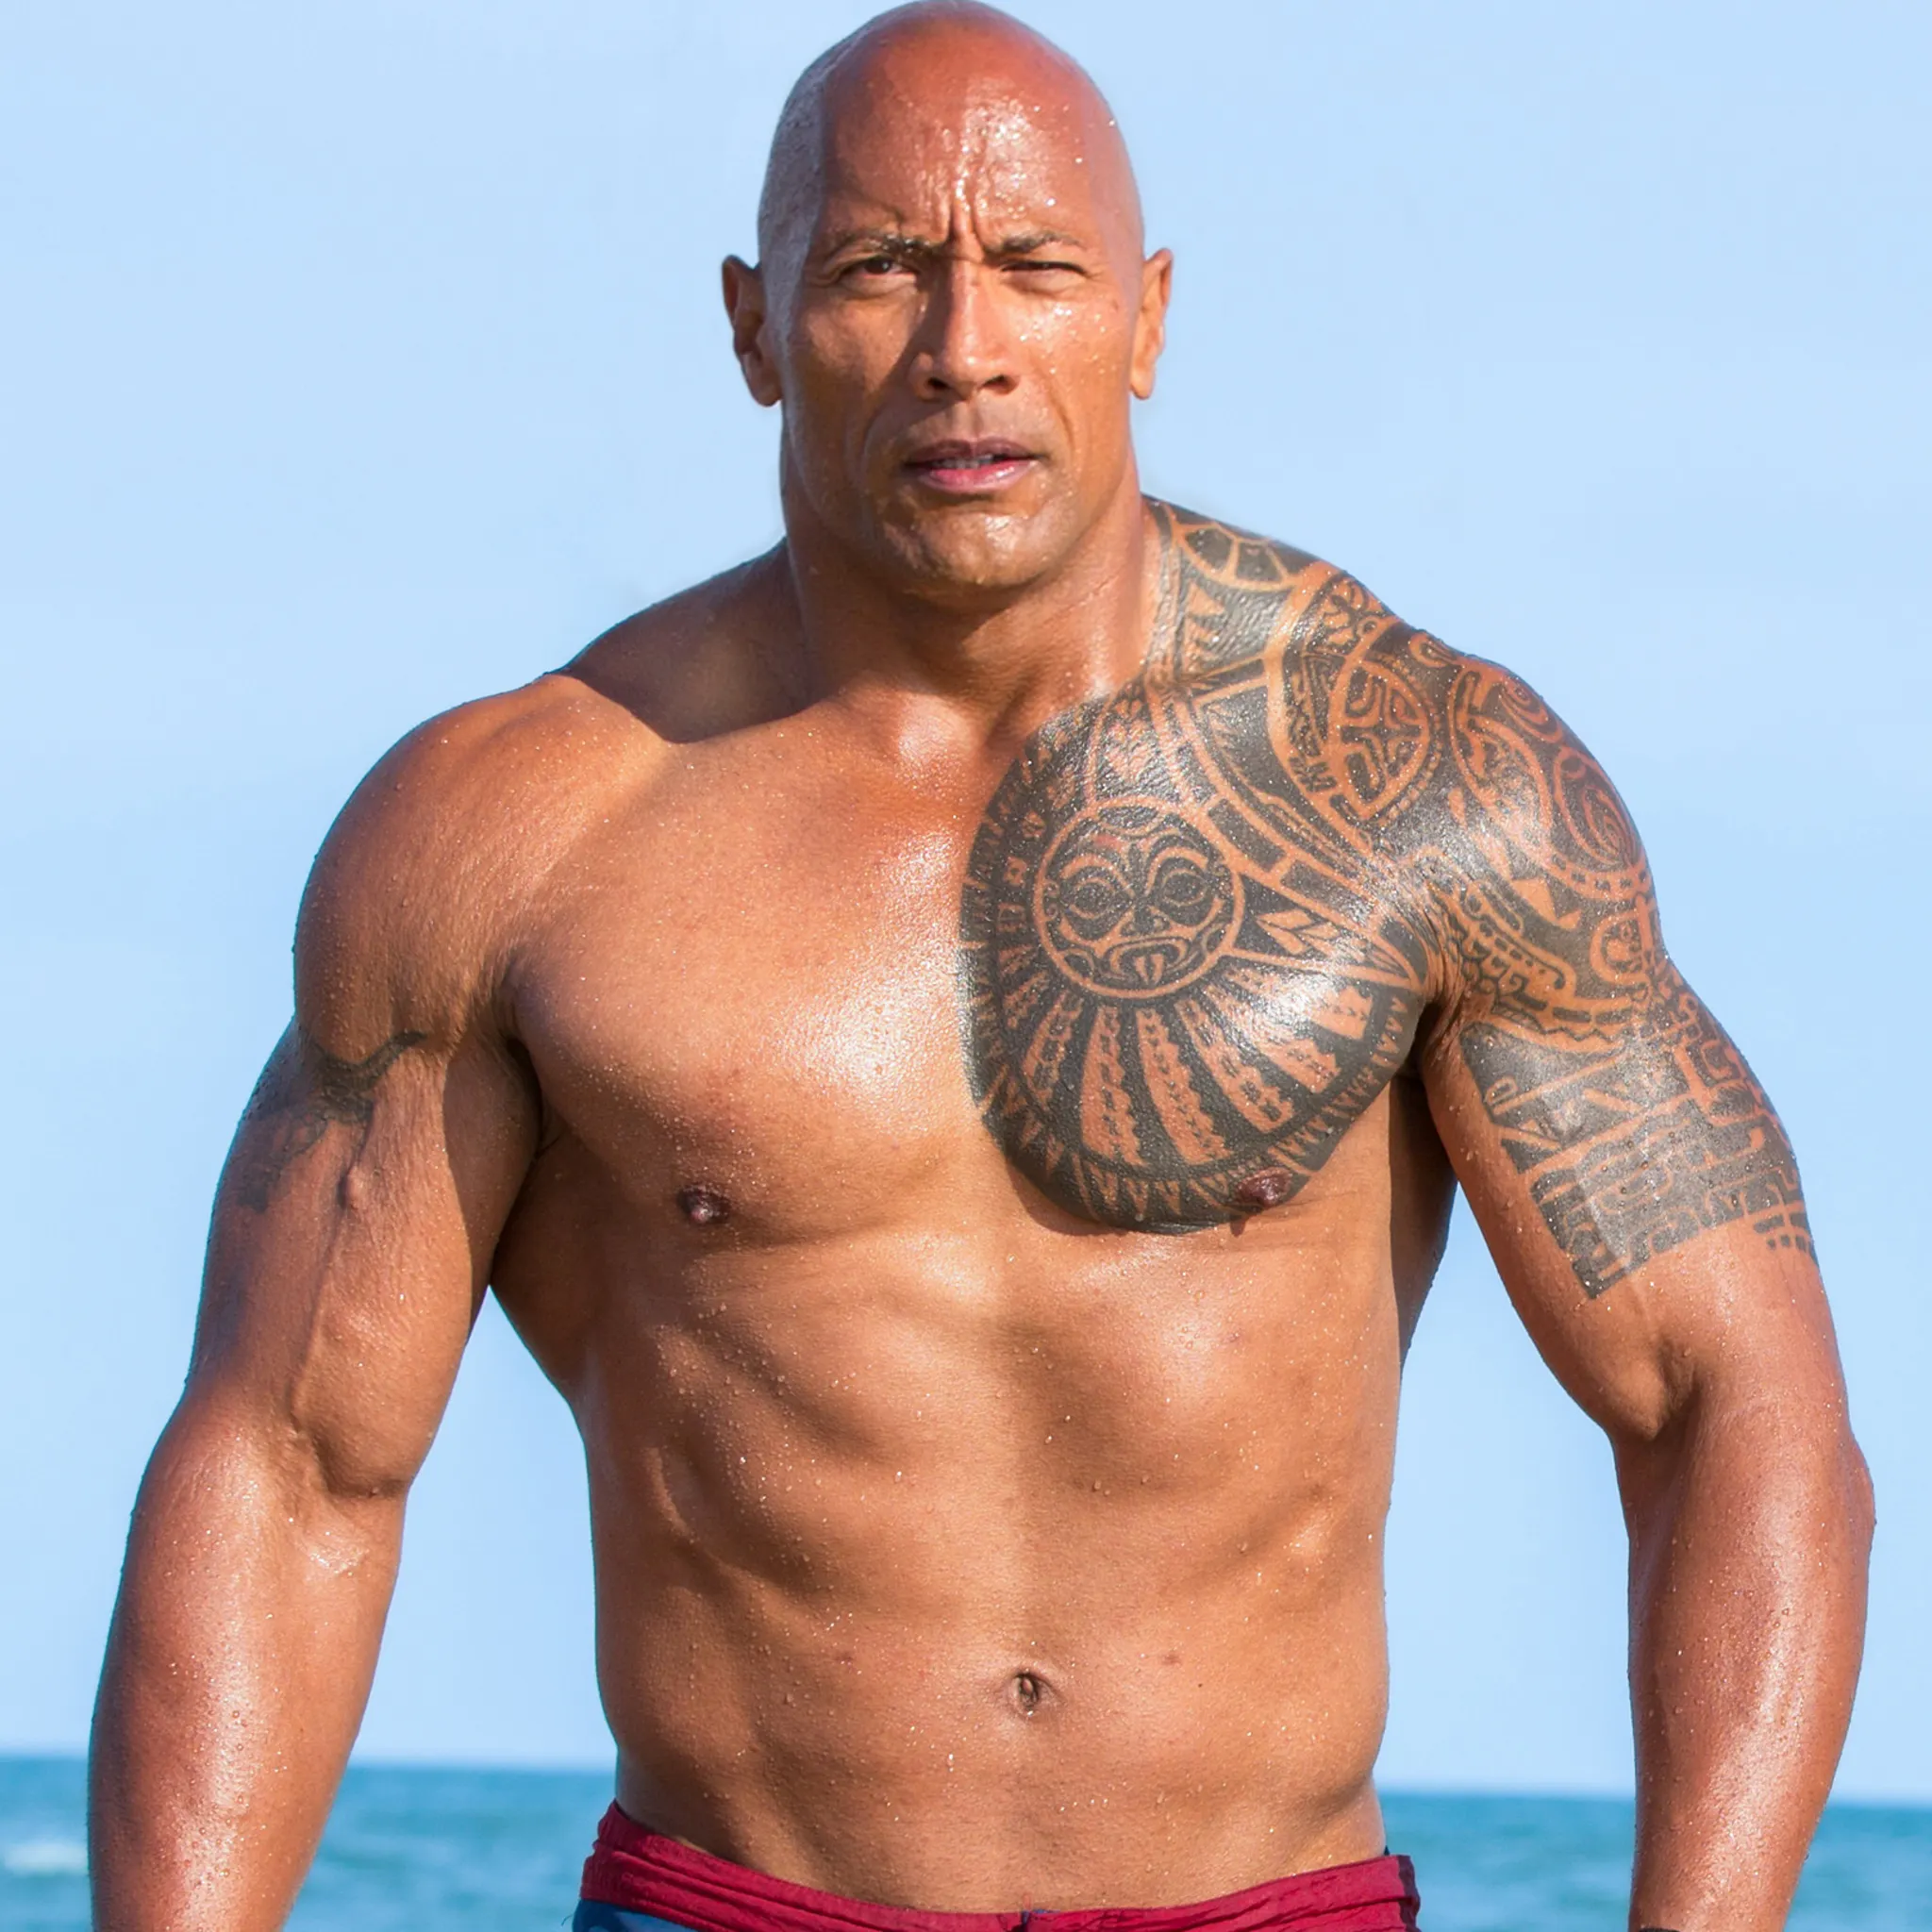 From Backlash To Redemption: Dwayne Johnson’s Powerful Response To Maui Wildfire Fund Controversy